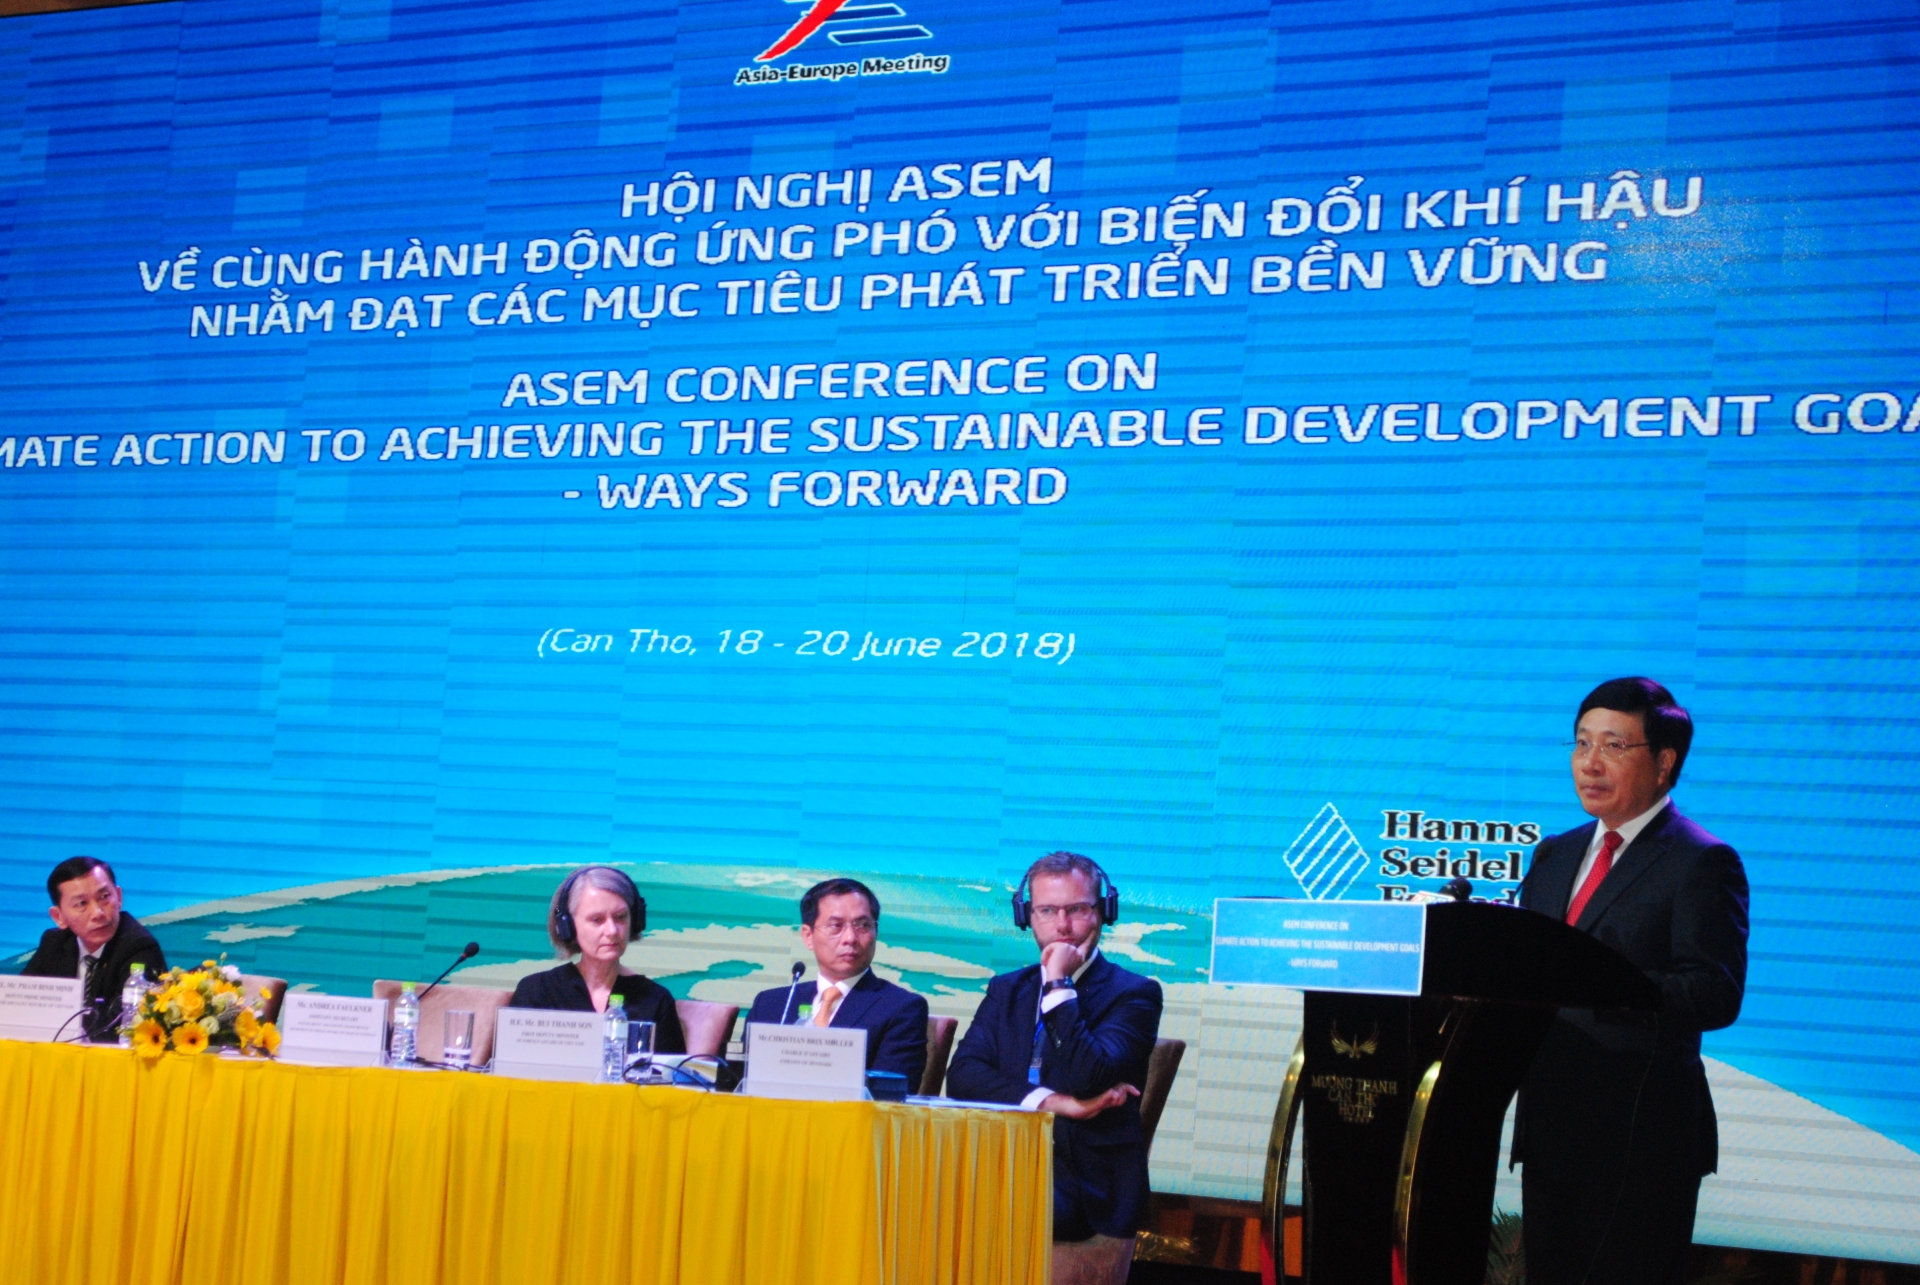 ASEM on climate action to achieving the sustainable development goals